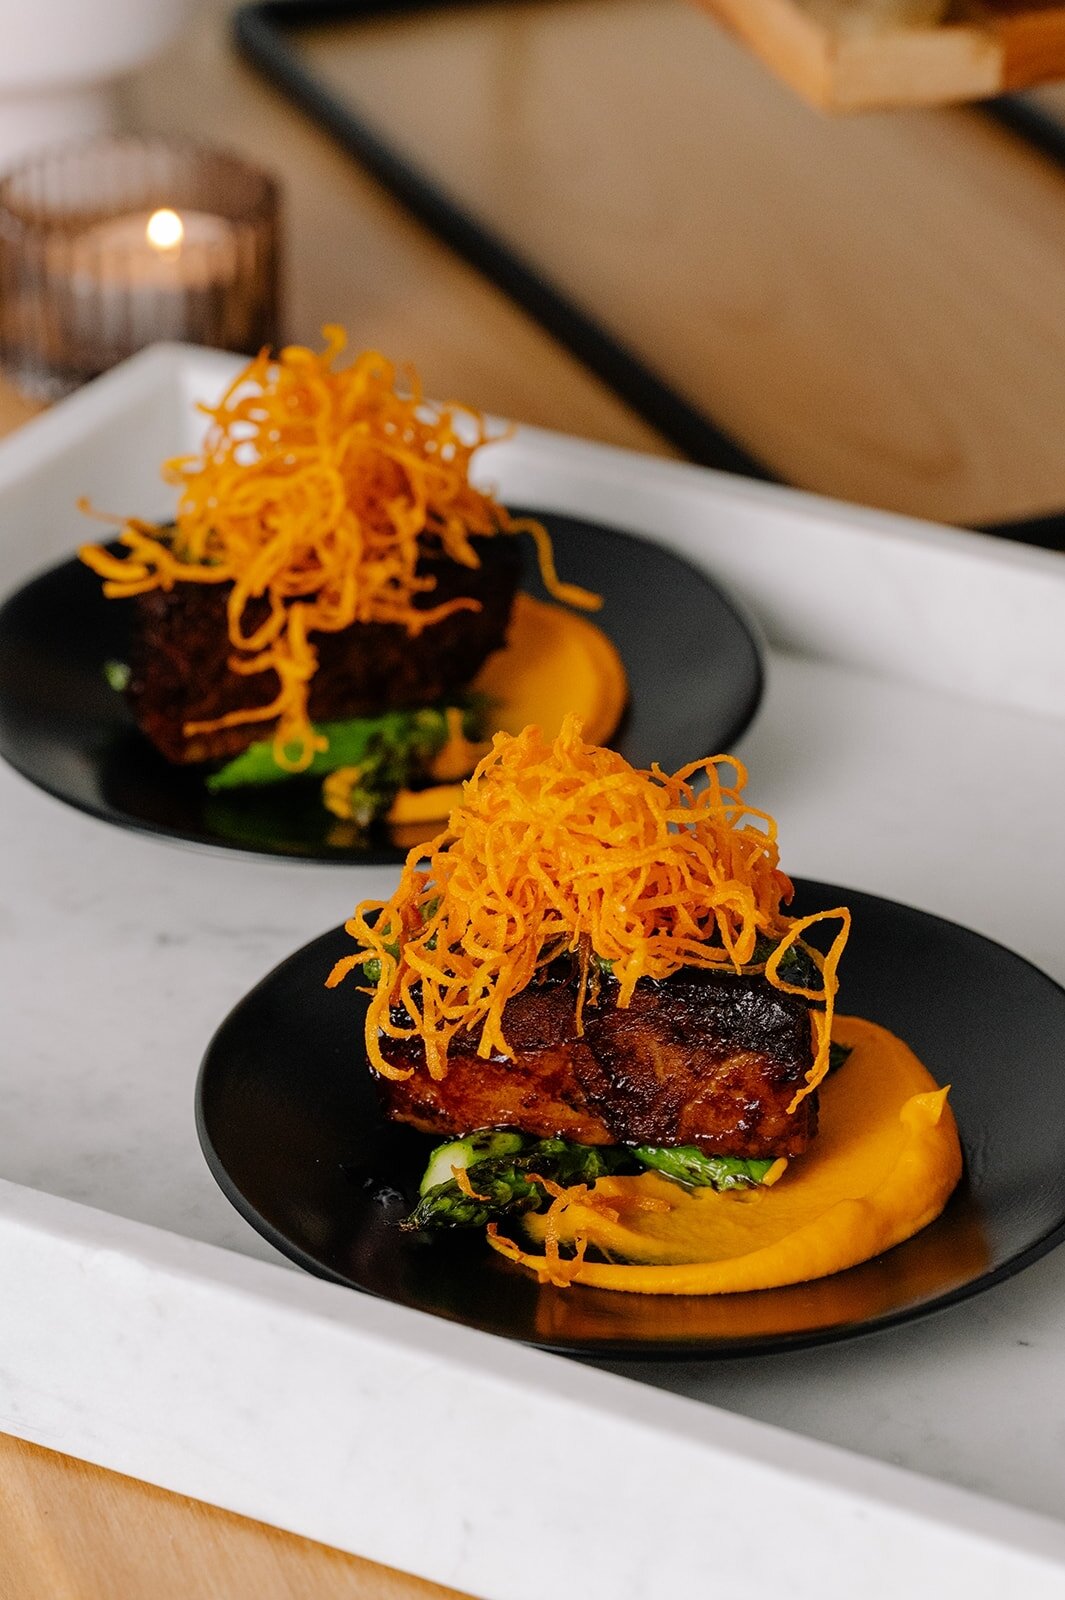 Serving up #smallplate goals, ​​​​​​​​
our Braised Beef Short Rib​​​​​​​​
-carrot fondant, asparagus, harissa, shoestrings ​​​​​​​​
It is oh so good!